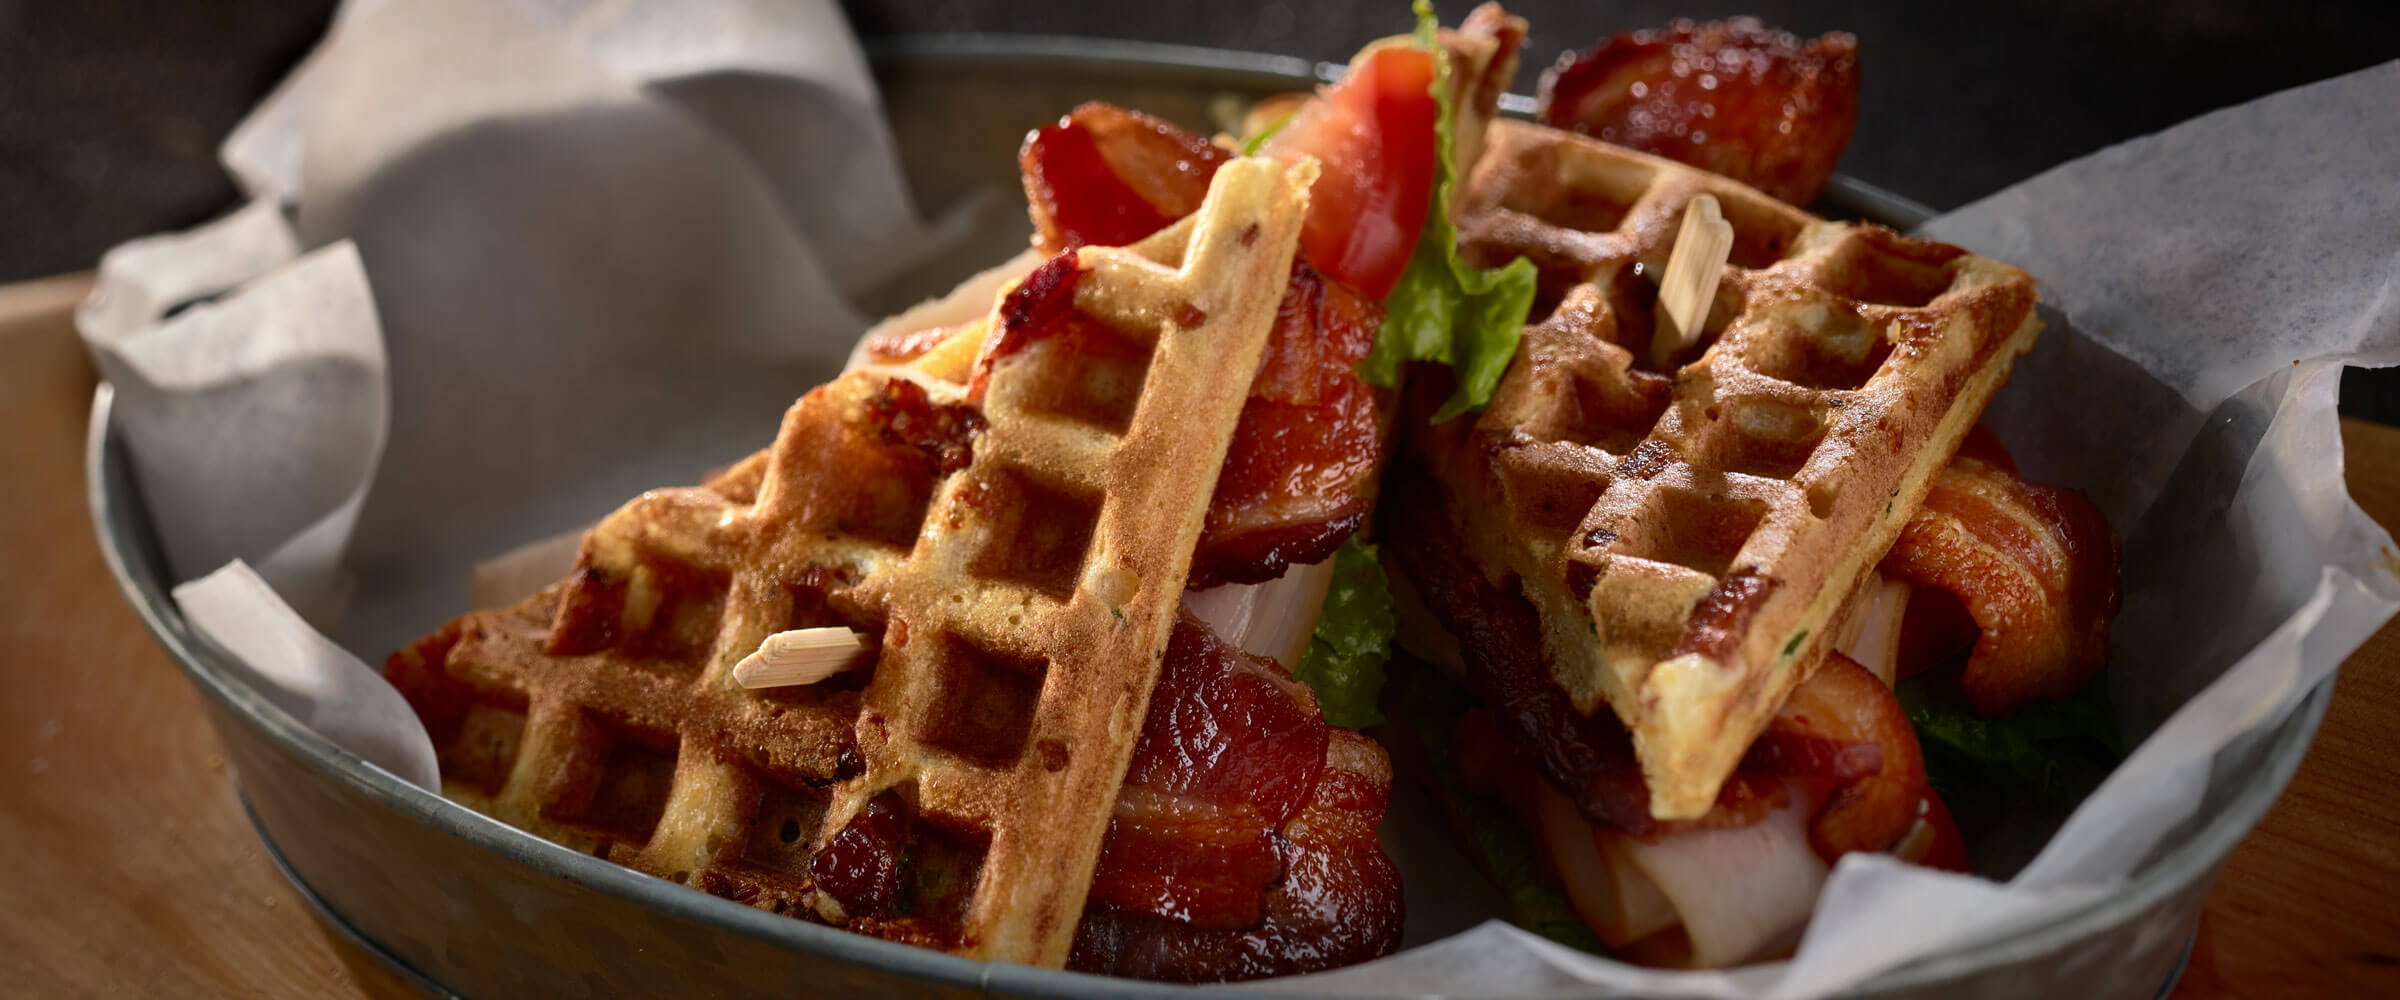 Pecanwood Bacon and Chicken Waffle sandwiches in serving bowl